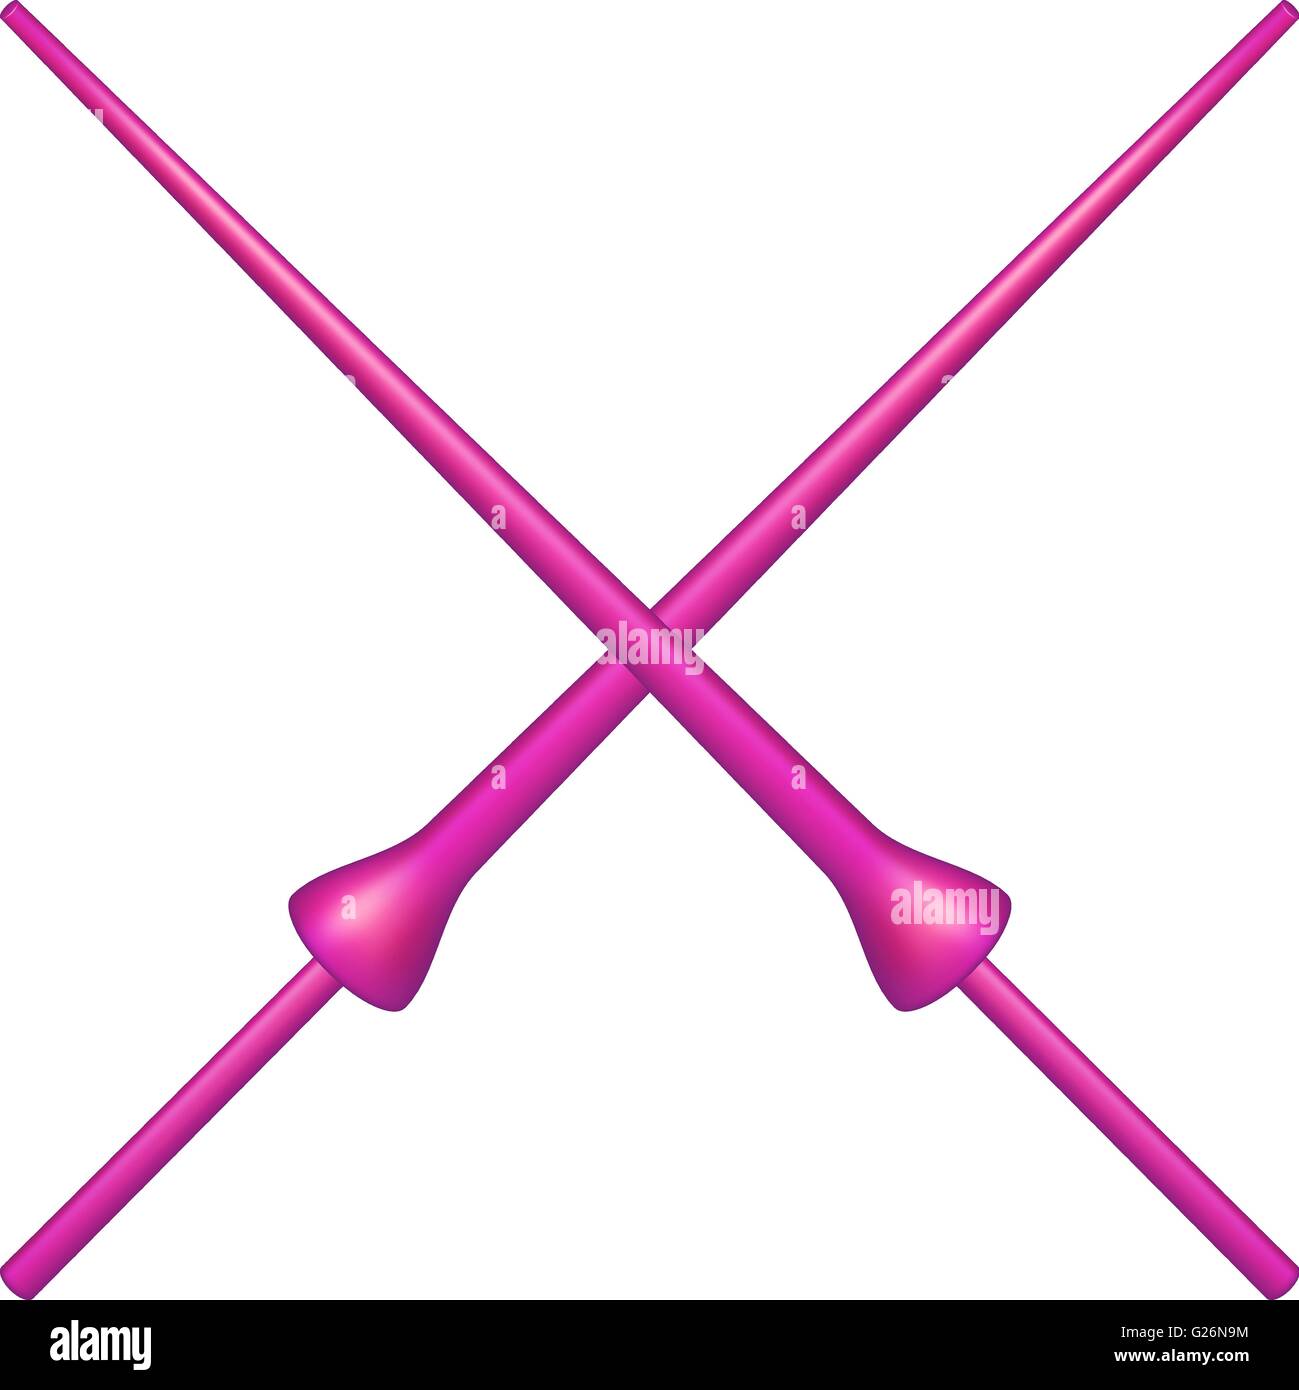 Two crossed lances in pink design Stock Vector